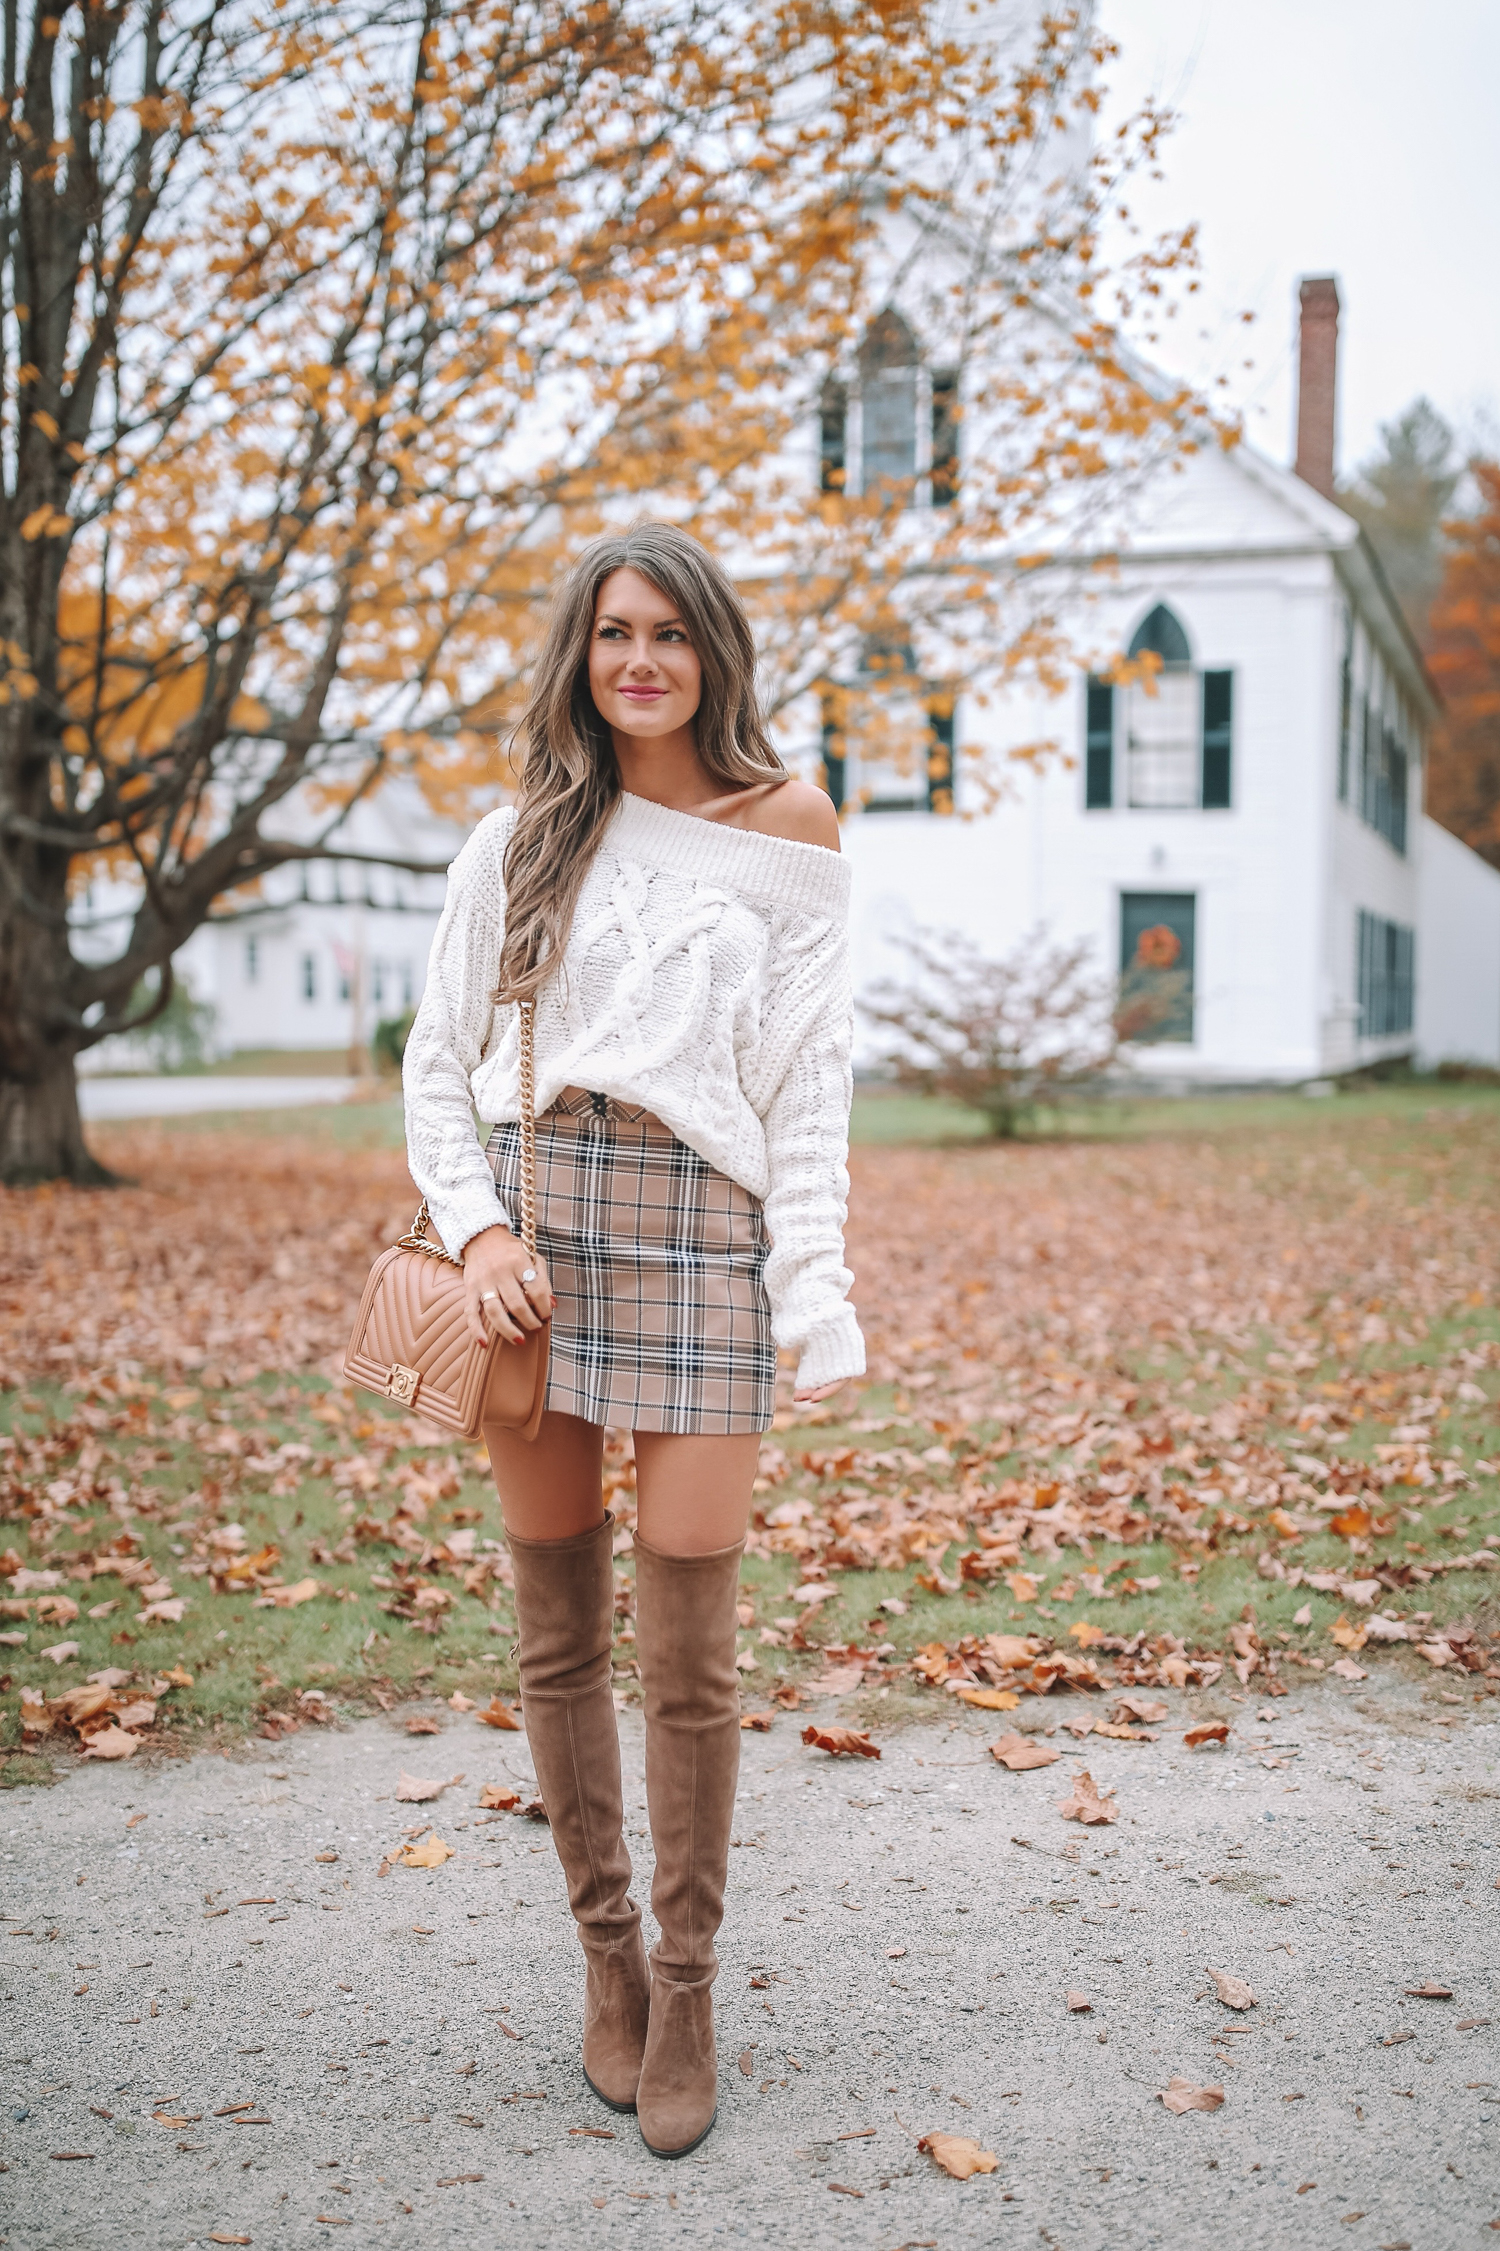 skirt with sweater and boots